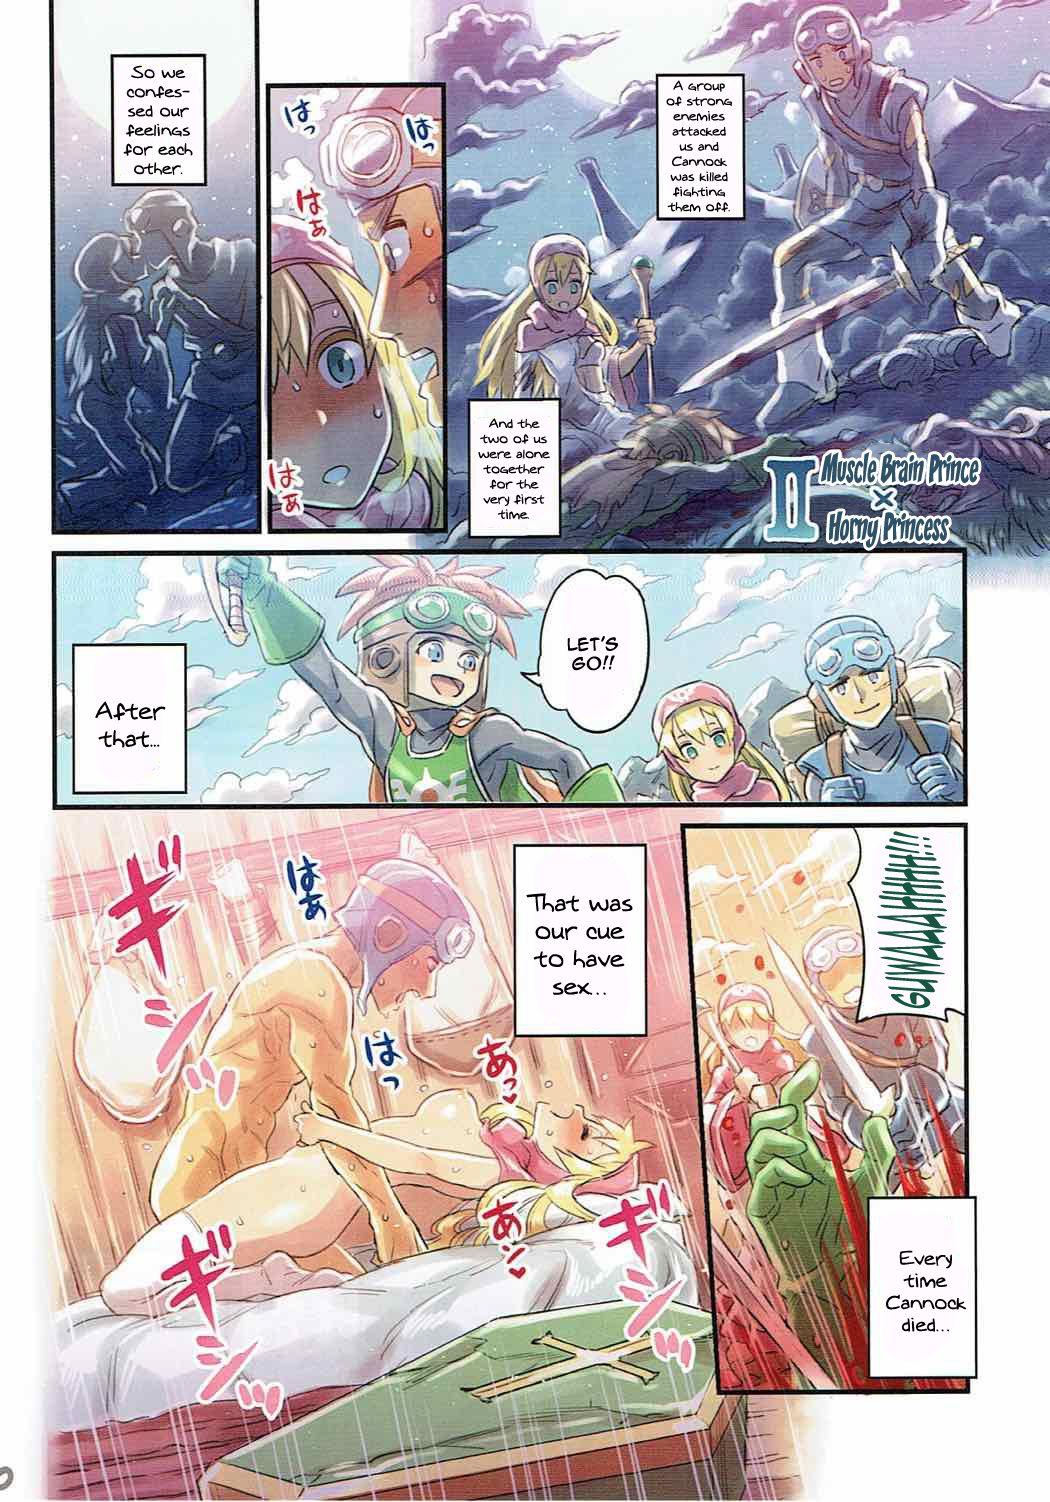 (C90) [Mimoneland (Mimonel)] Nakama to Issen Koechau Hon ~DQ Hen 2~ | A Book About Crossing The Line With Companions ~DQ Edition~ 2 (Dragon Quest) [English] {Doujins.com} 8